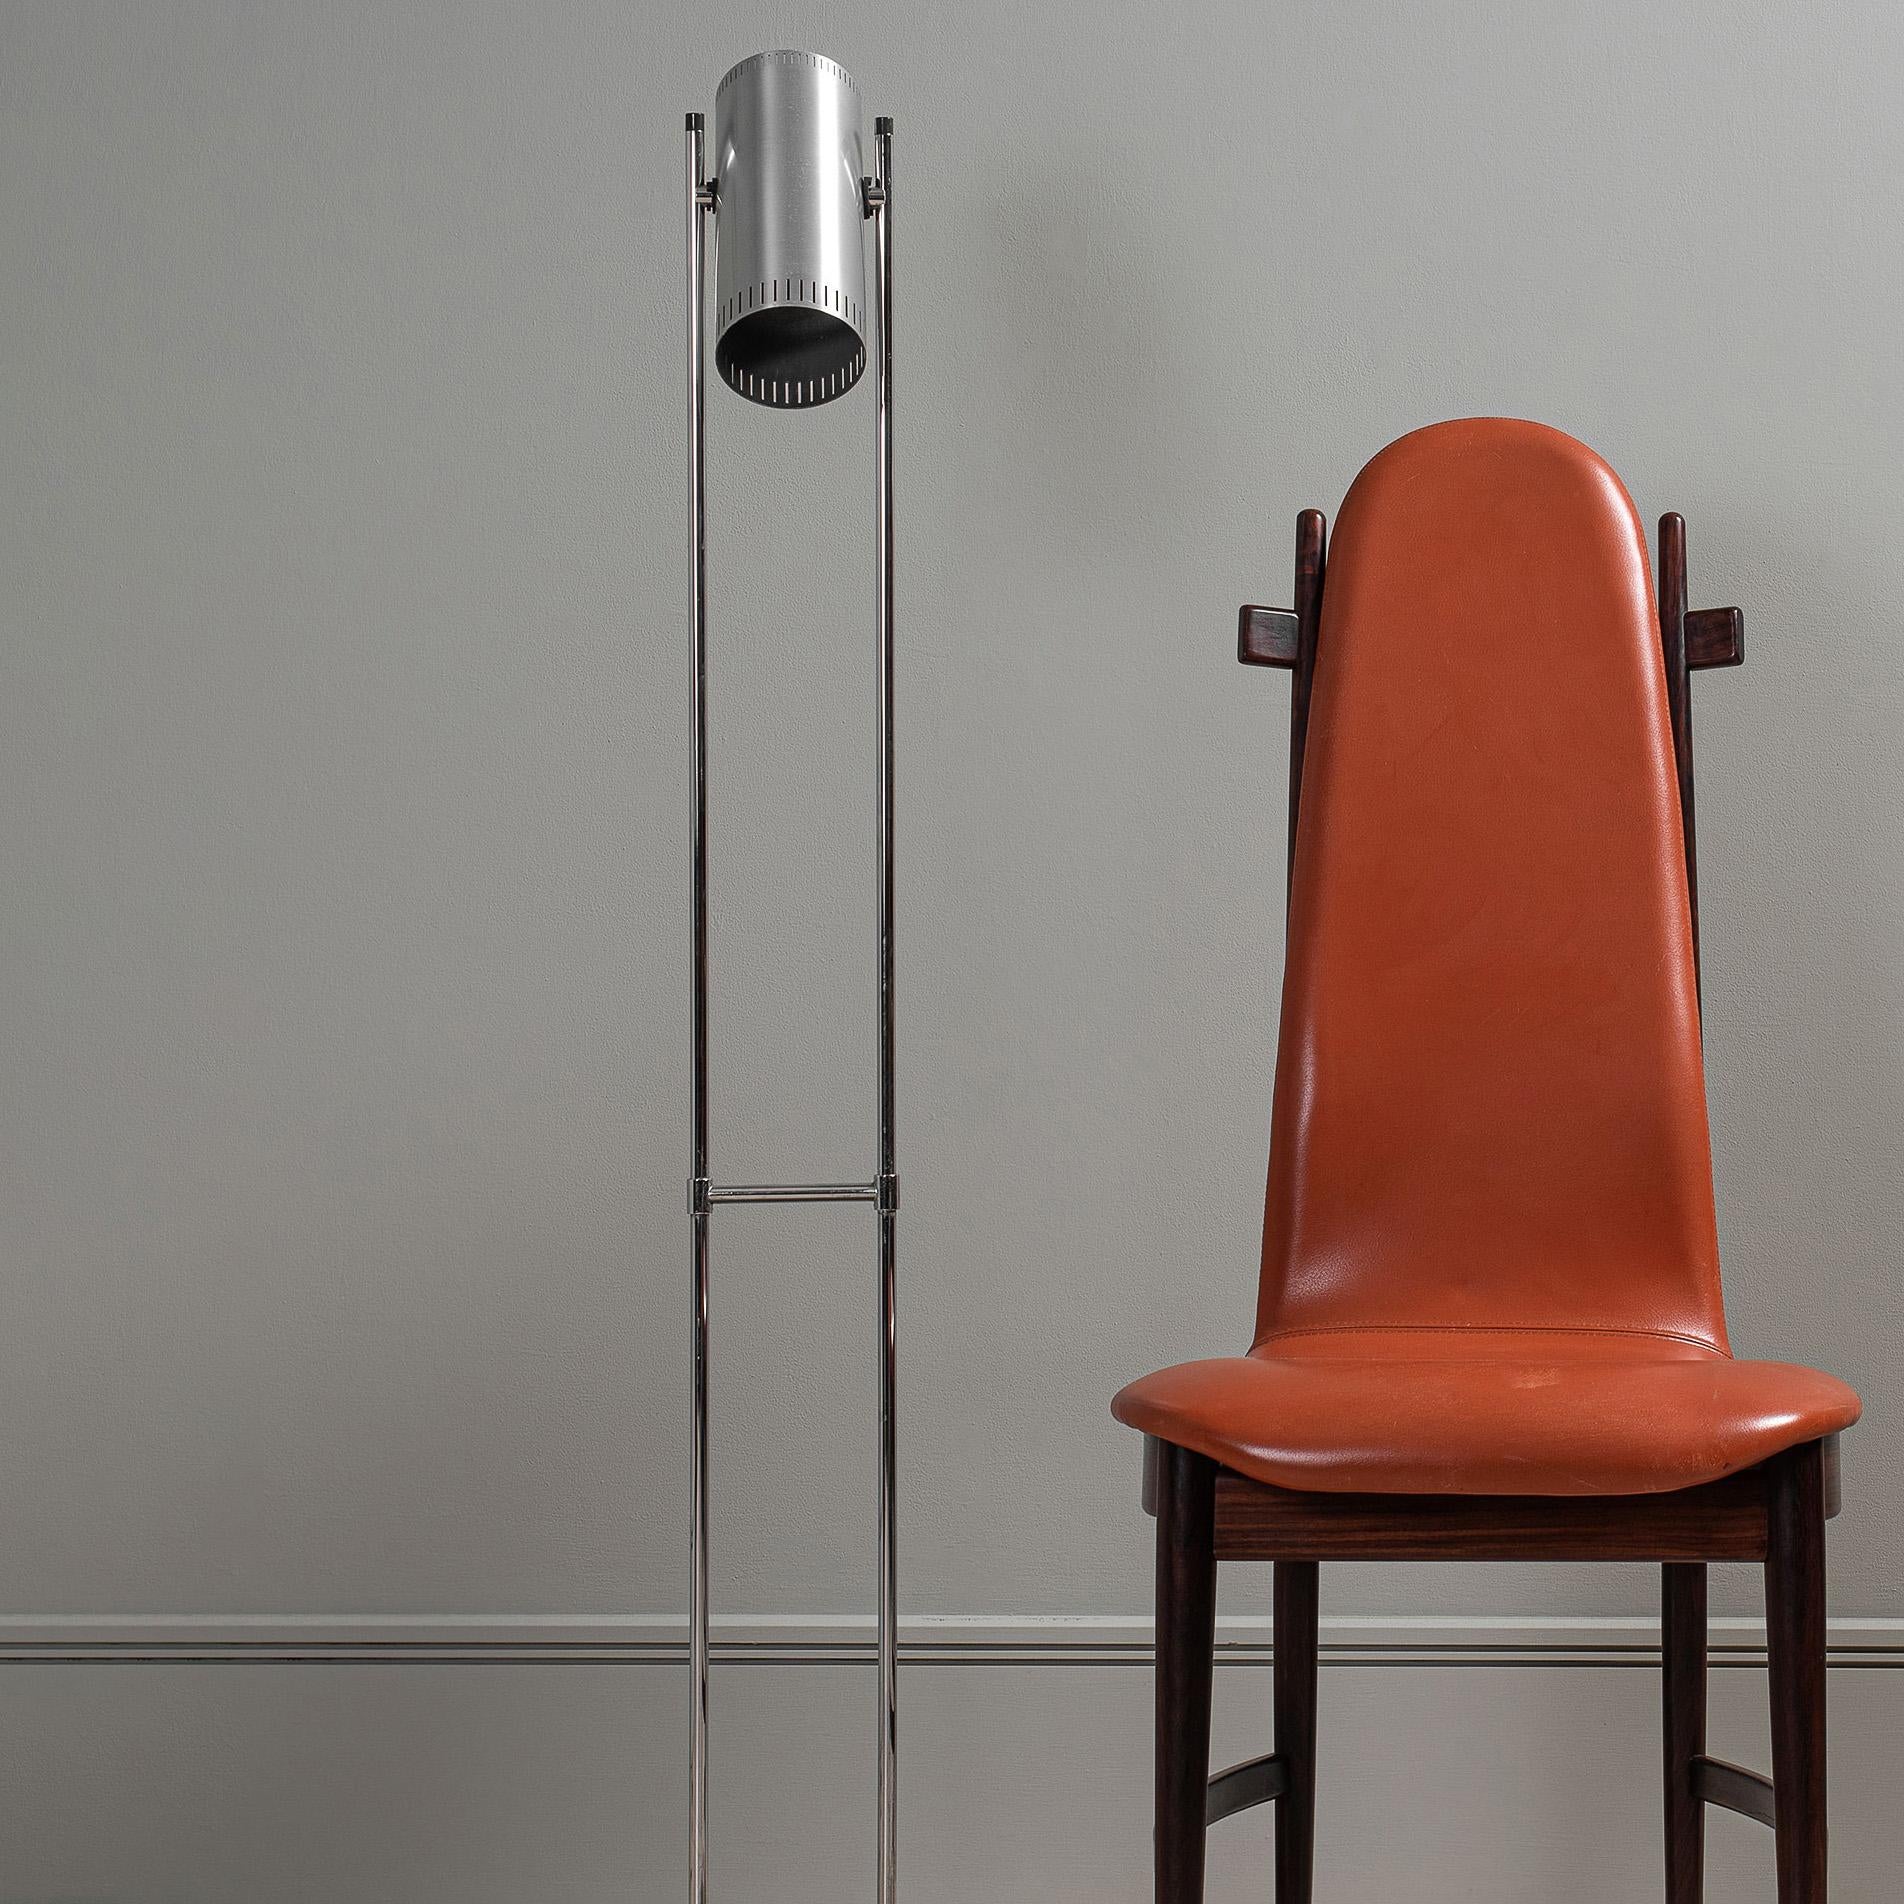 The classic midcentury Trombone II floor lamp designed by Jo Hammerborg for Fog and Morup, Denmark, 1966. 
Strict modernist lines of chrome and aluminium with angle adjustable cylinder head. On/off button is located in the top of the cylinder head.